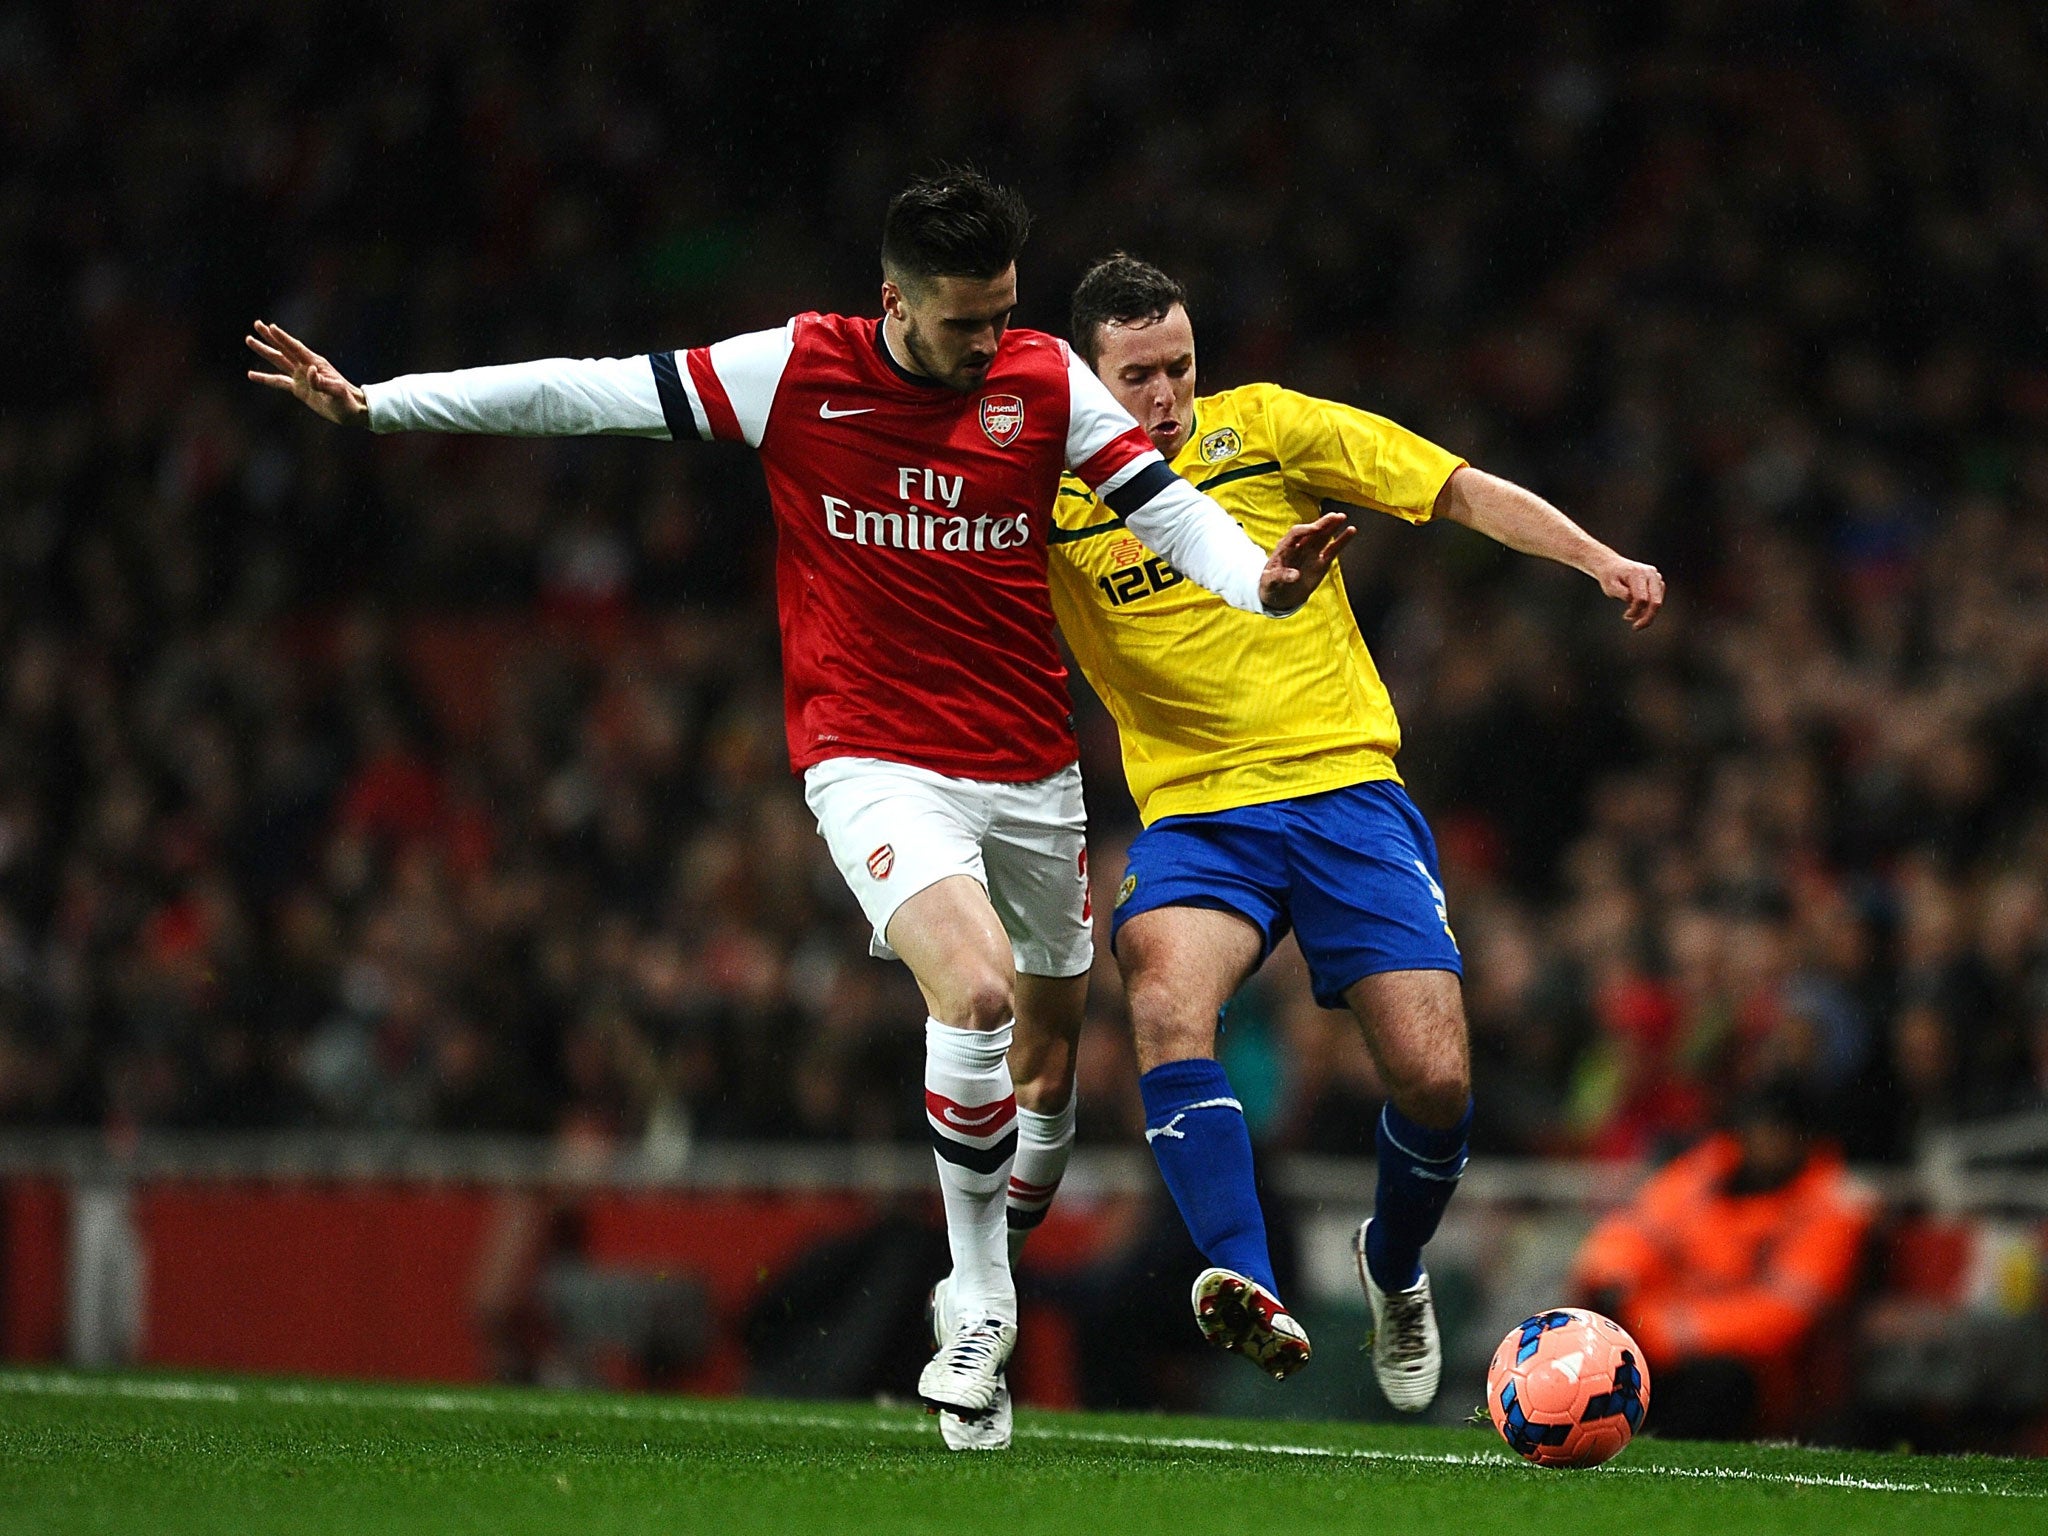 Coventry City's Blair Adams (right) and Arsenal's Carl Jenkinson battle for the ball